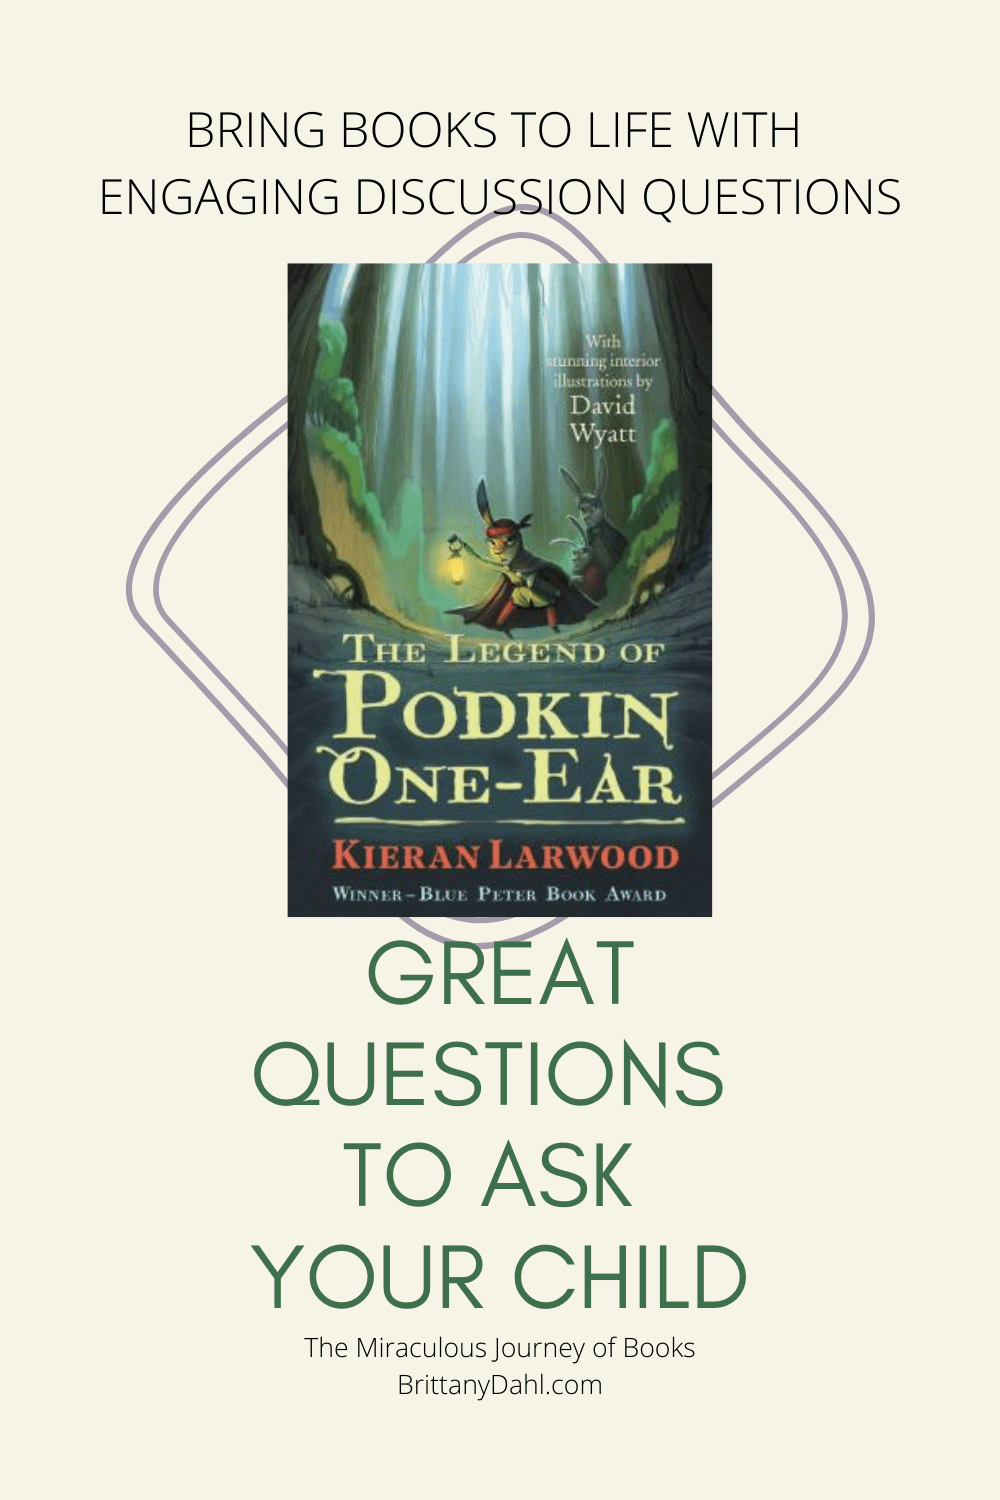 The Legend of Podkin One-Ear – Book Review